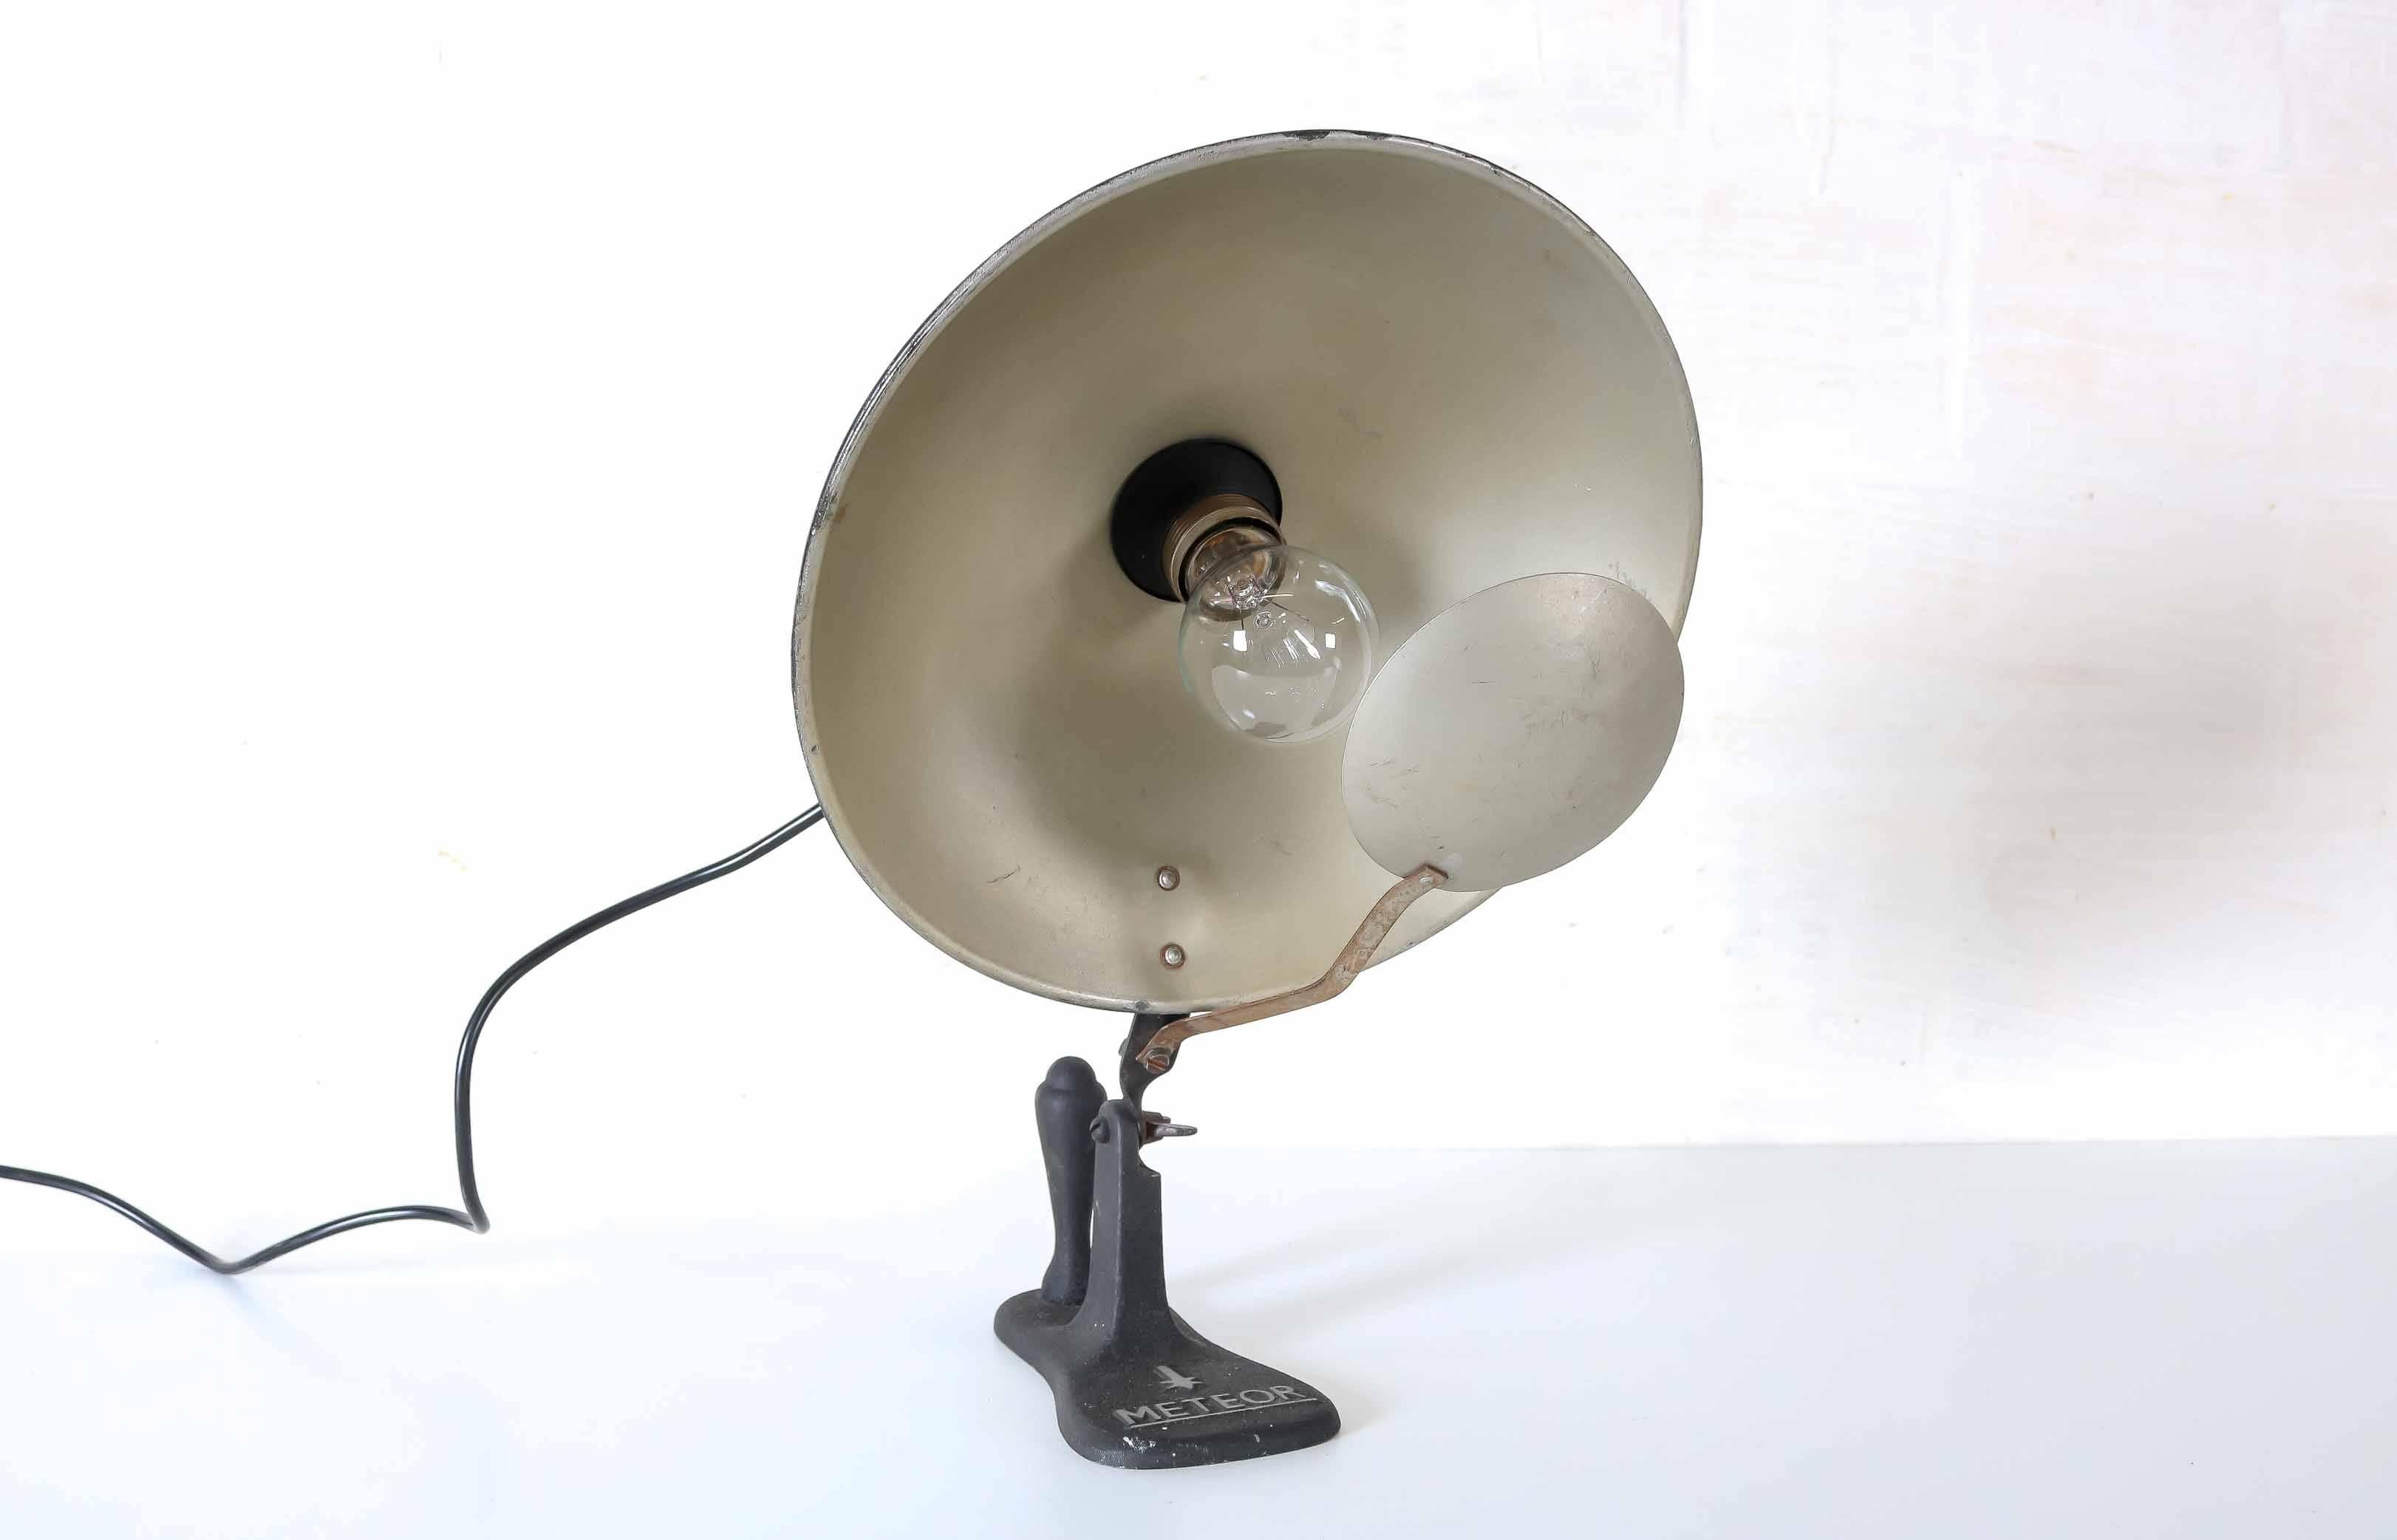 Industrial lamp from the brand Meteor.
Has a wooden handle. Can be darkened with the eclipse which has a very nice effect.